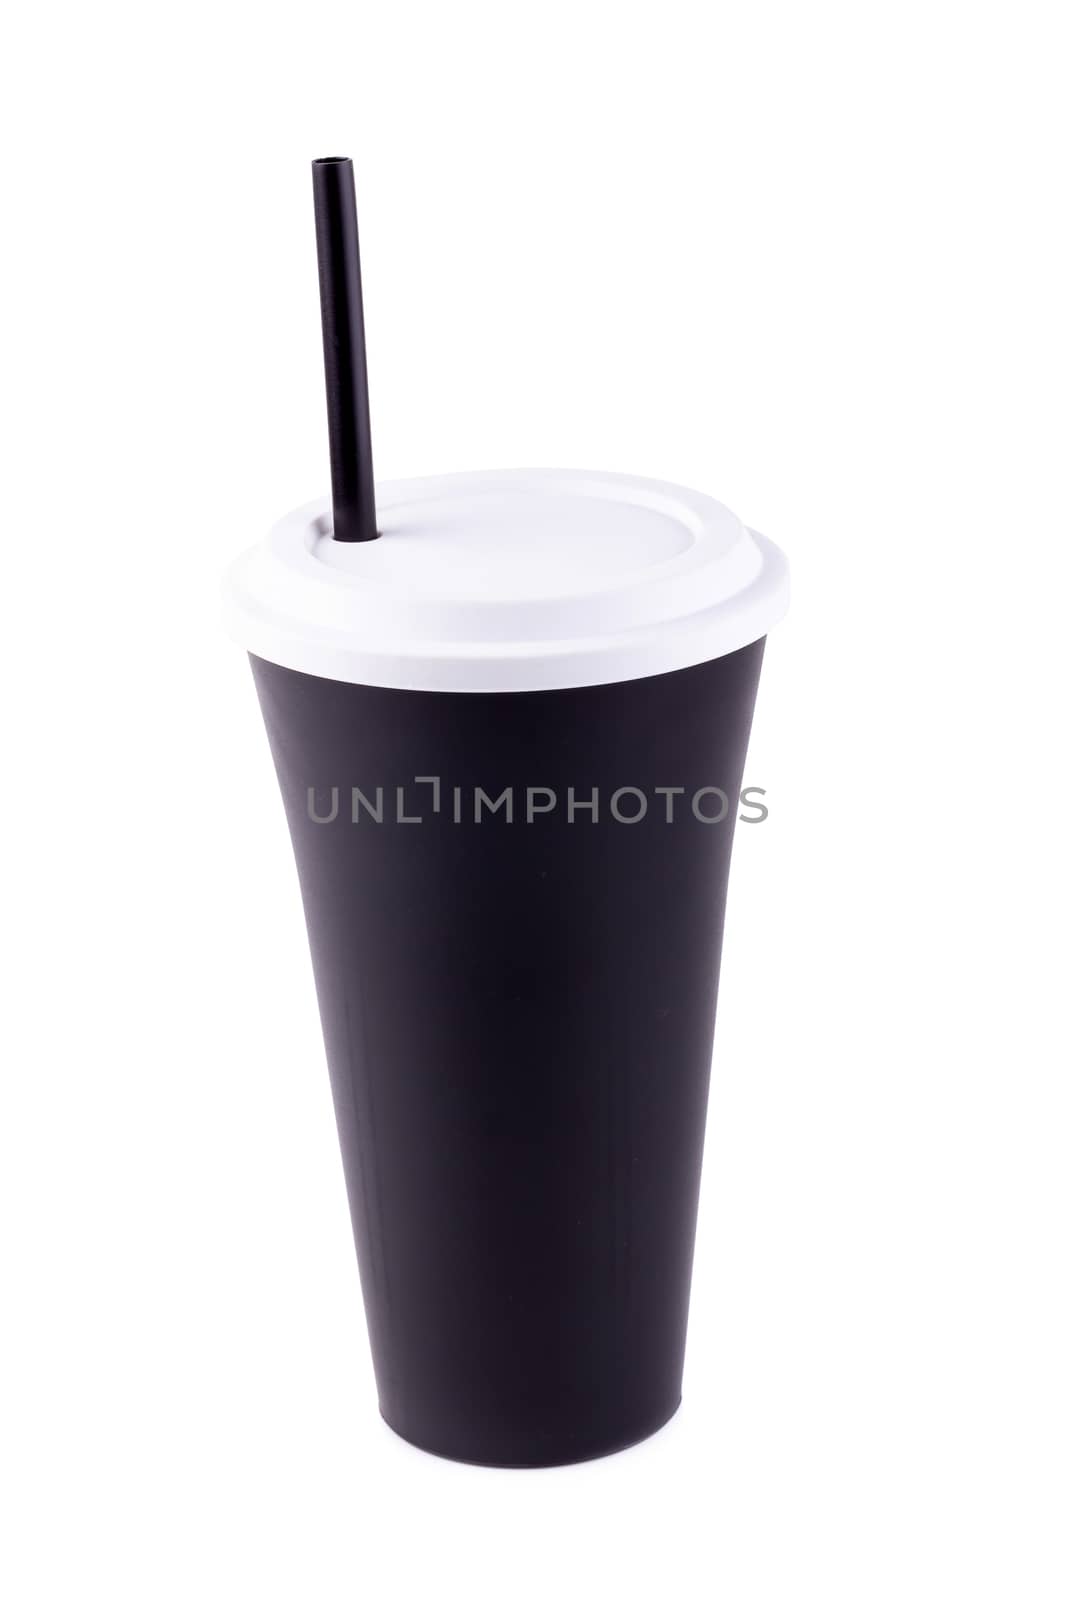 Black Disposable Cup for beverages isolated on white background.